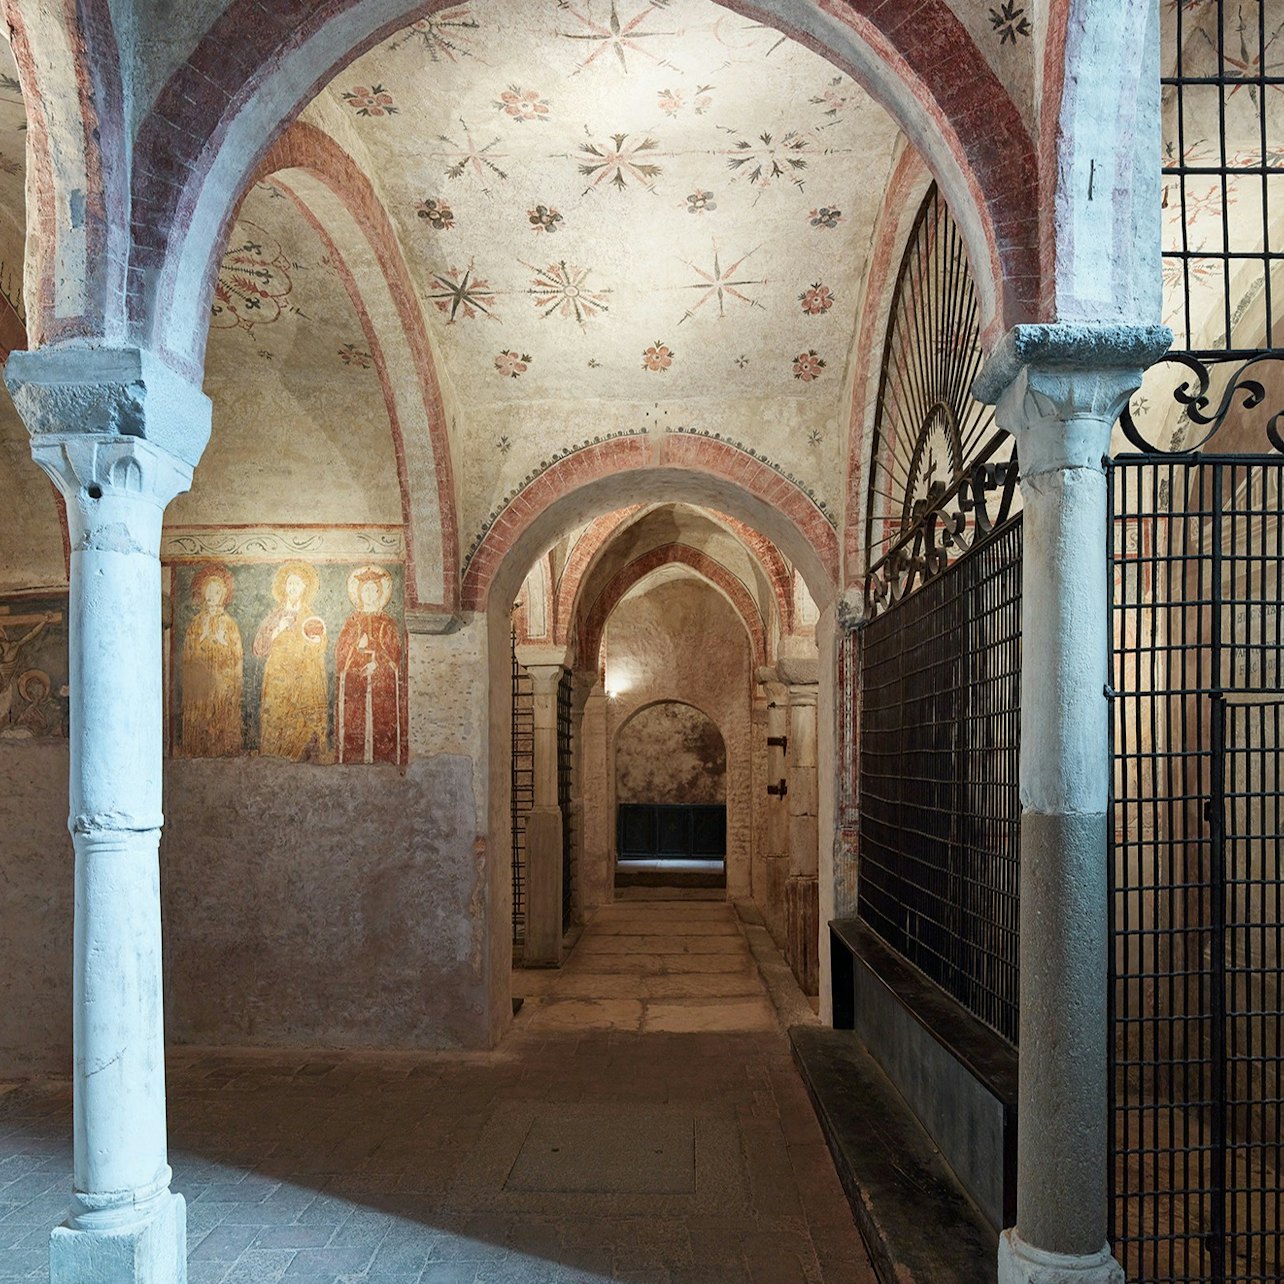 Entrance to the Crypt of San Sepolcro - Accommodations in Milan